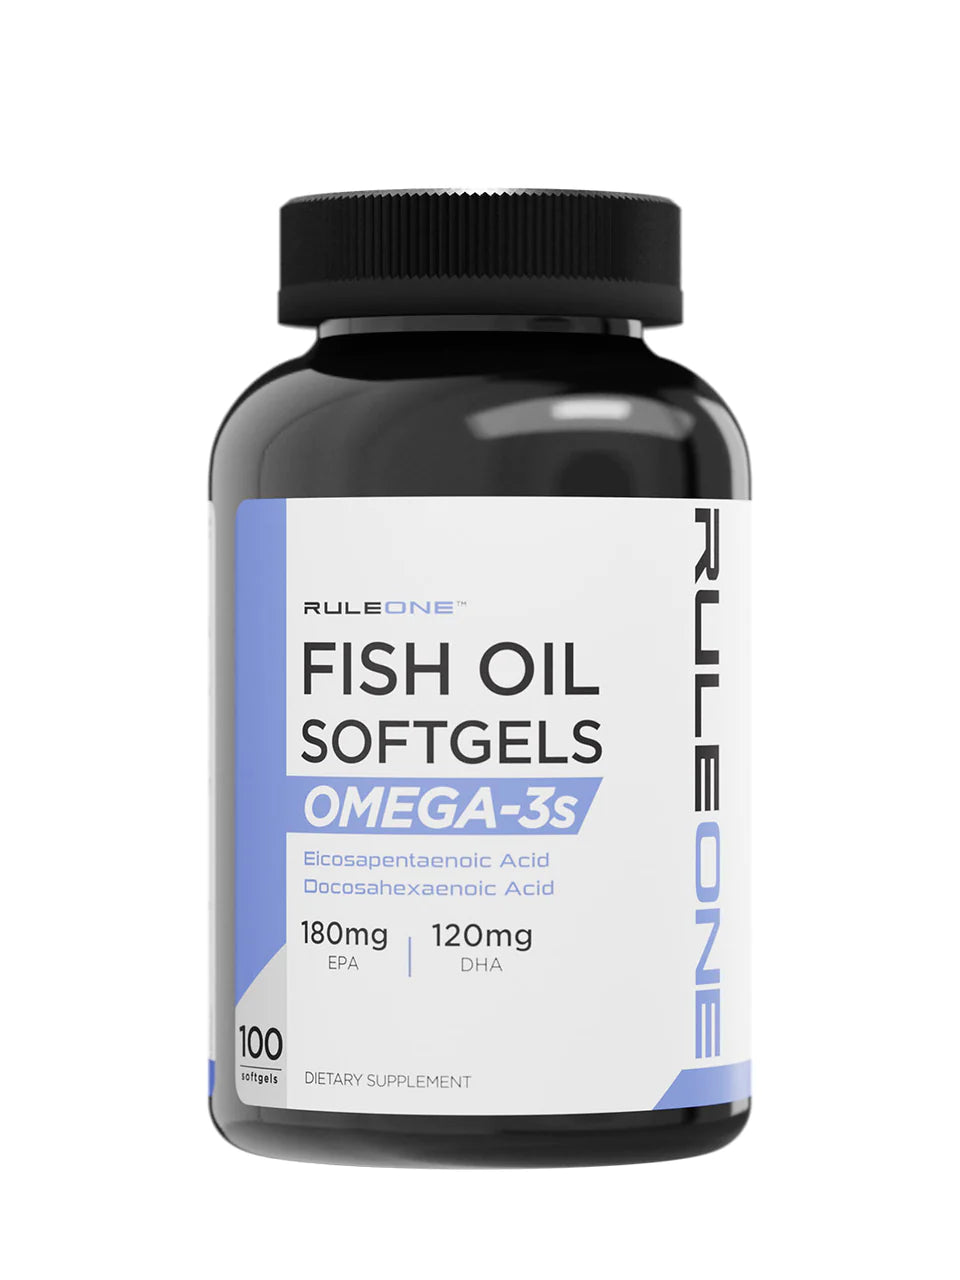 Rule 1 Protein - Fish Oil Softgels Omega-3s